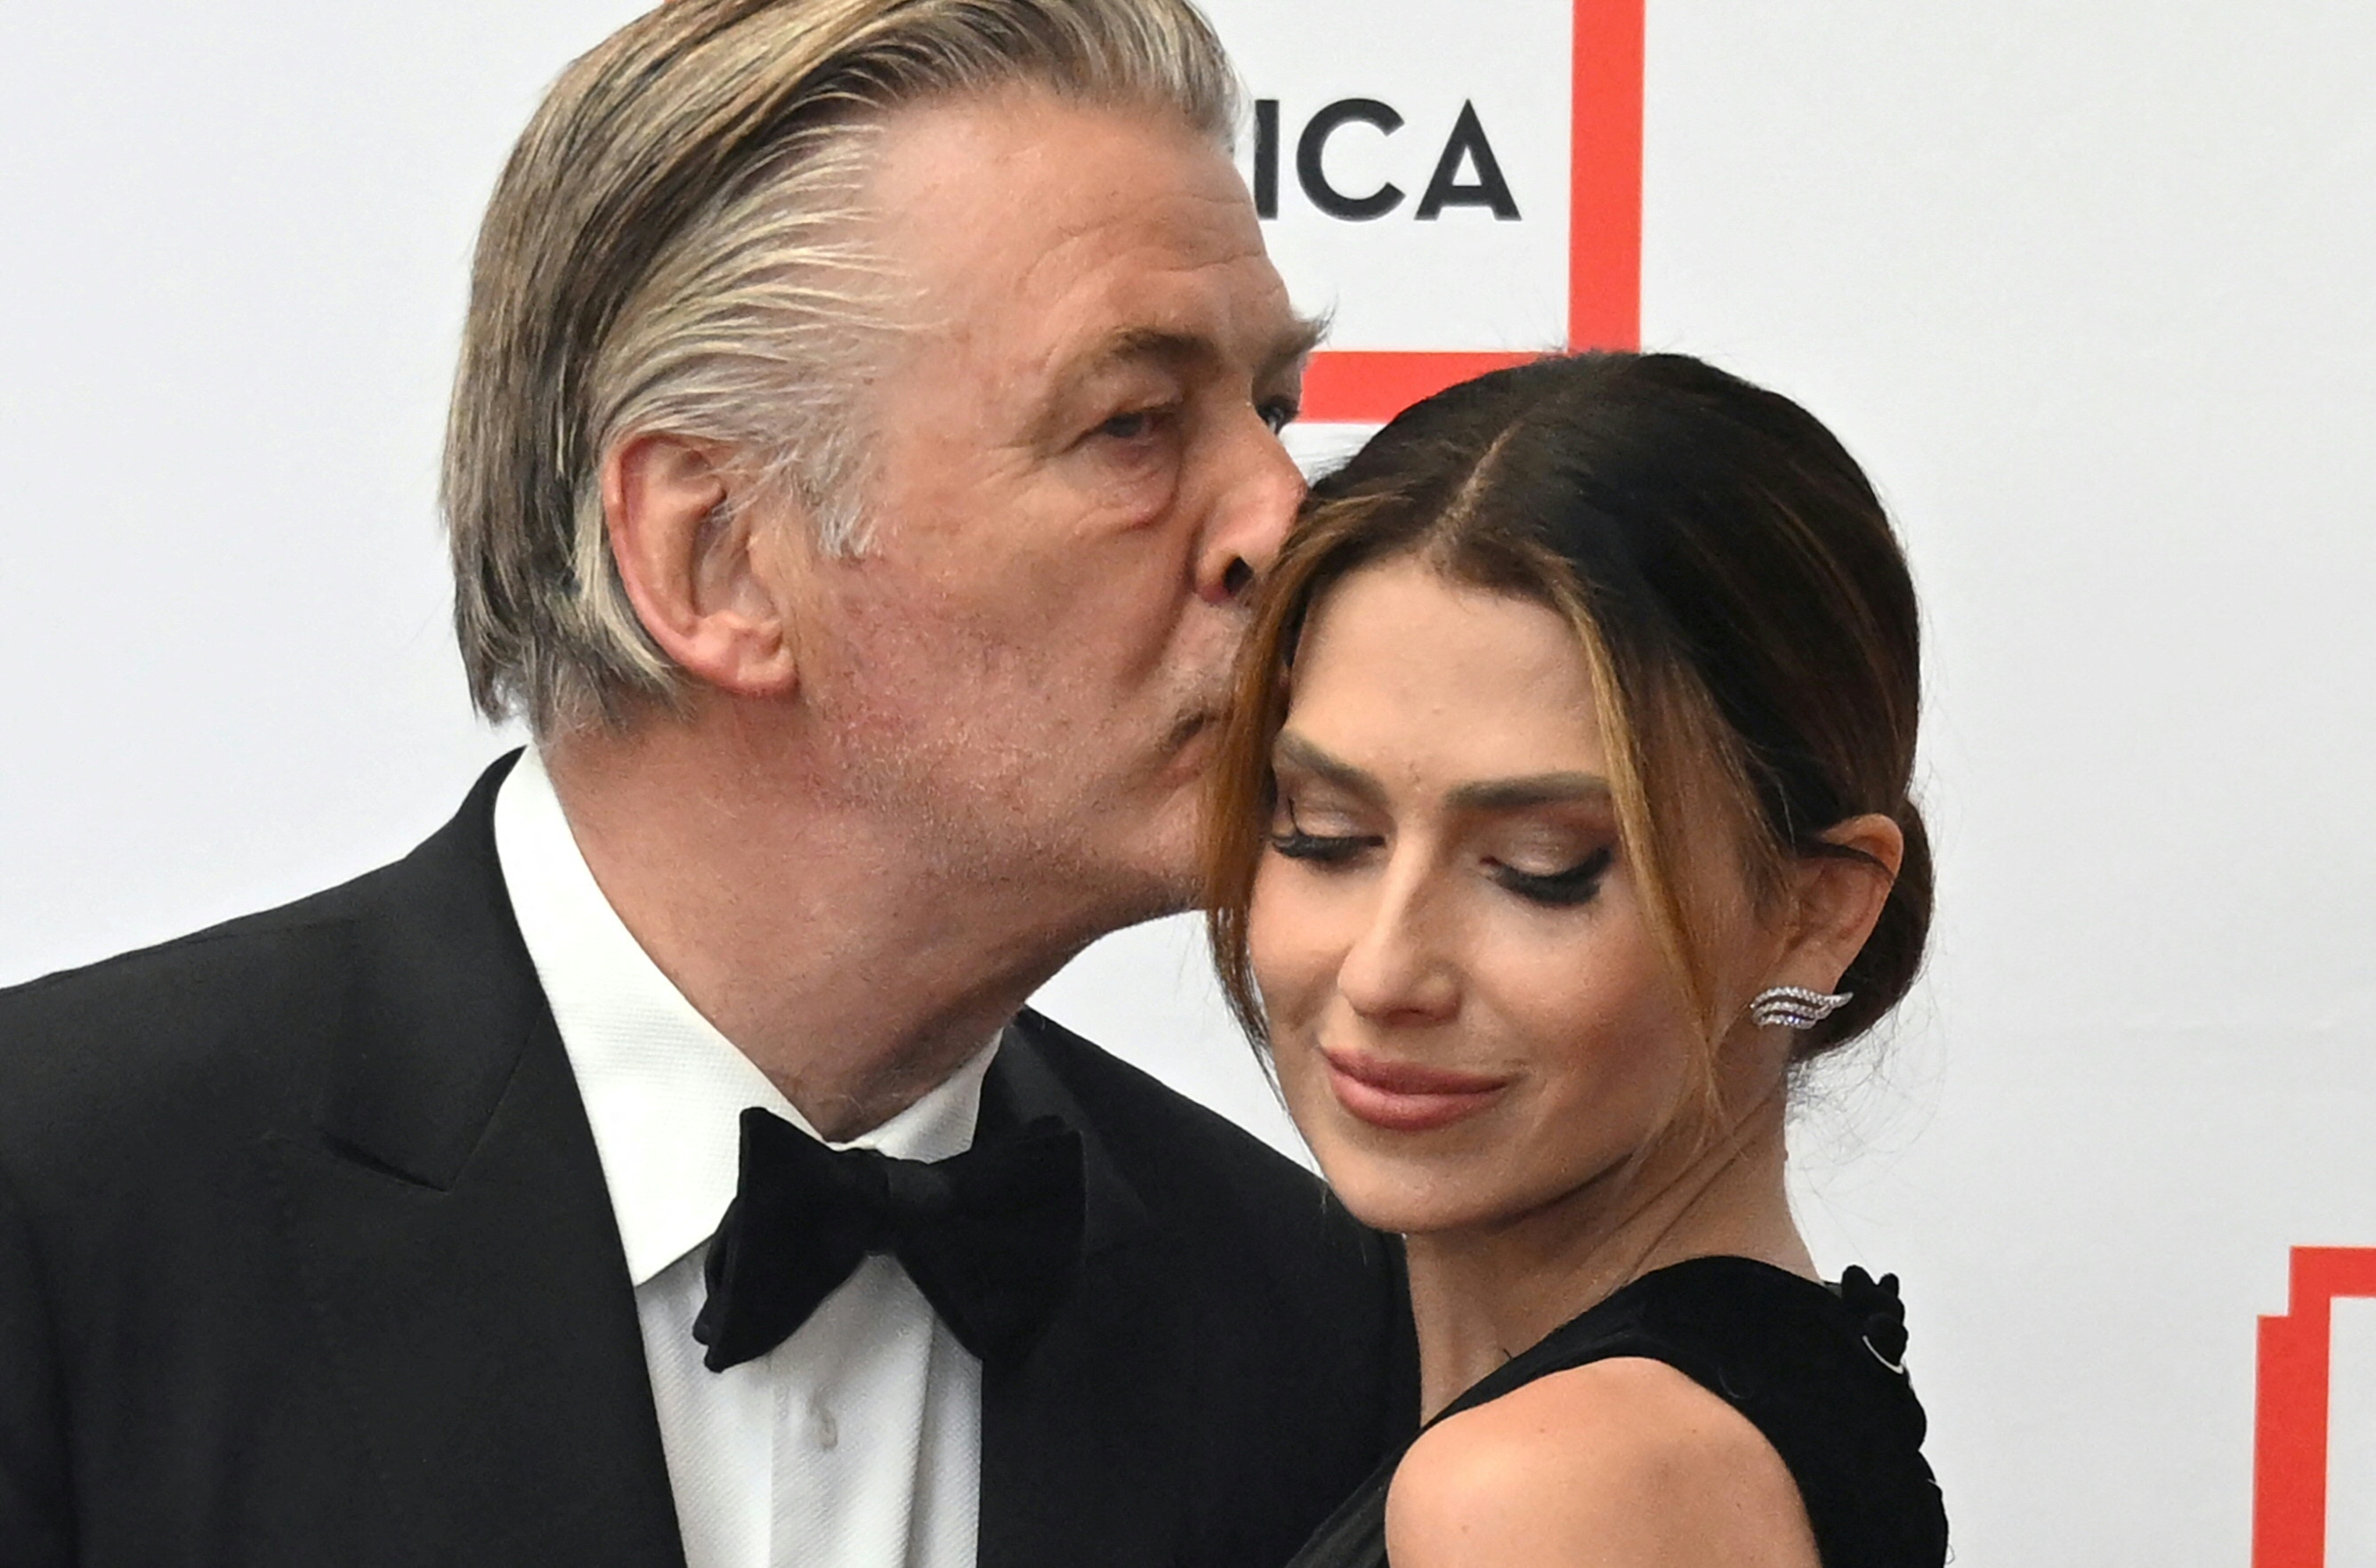 US actor Alec Baldwin and his wife Hilaria Baldwin arrive for the PEN America Literary Gala at the American Museum of Natural History in New York City on May 18, 2023. This year's gala, hosted by US comedian Colin Jost, is honoring Canadian writer and producer Lorne Michaels. (Photo by TIMOTHY A. CLARY / AFP) (Photo by TIMOTHY A. CLARY/AFP via Getty Images)